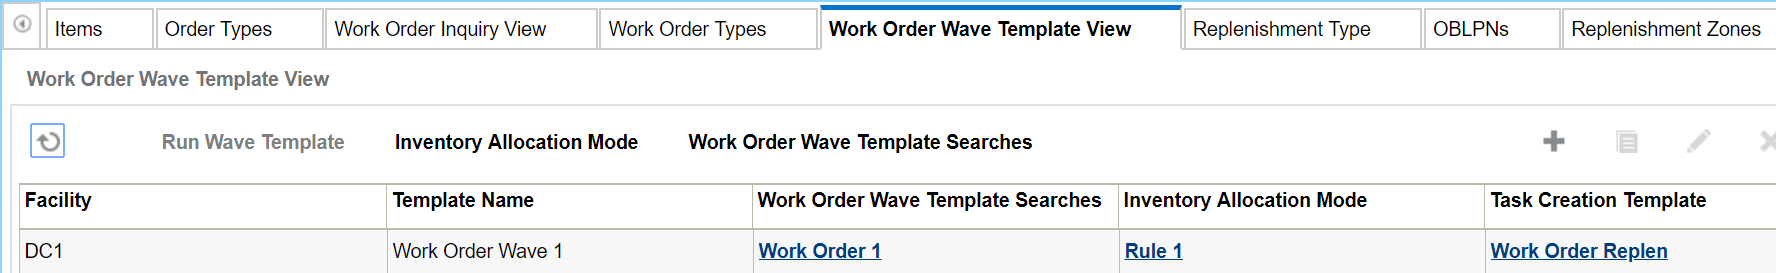 work order wave template